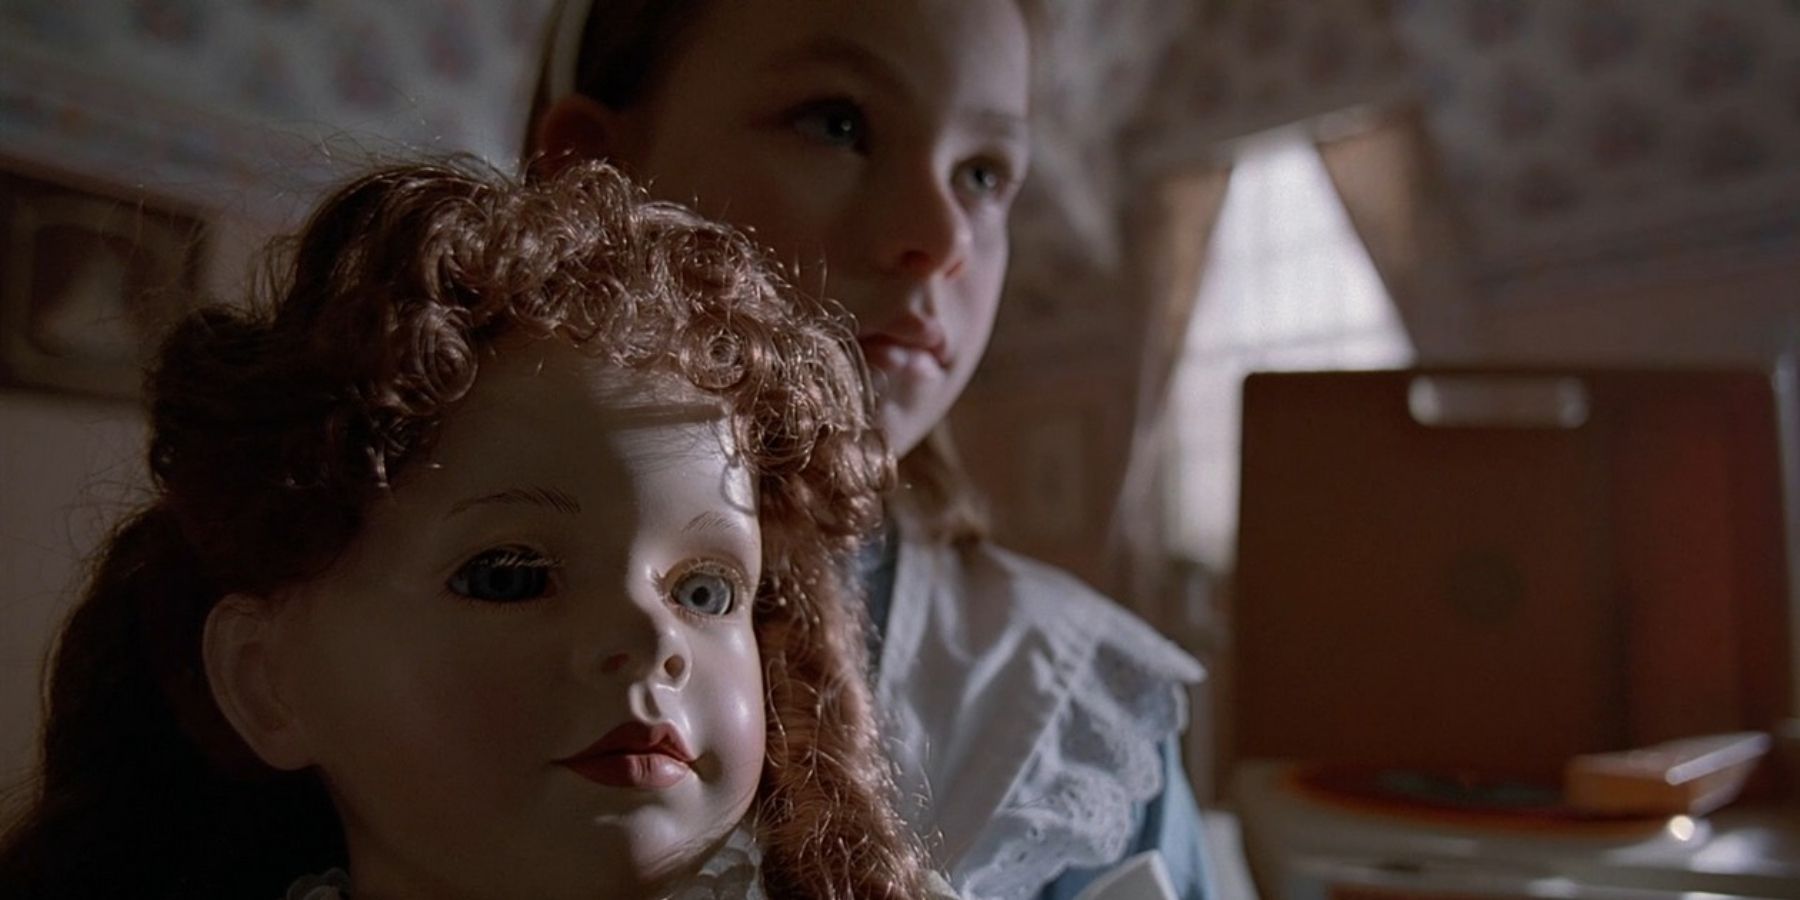 A young girl holding a doll in The X-Files episode "Chinga"